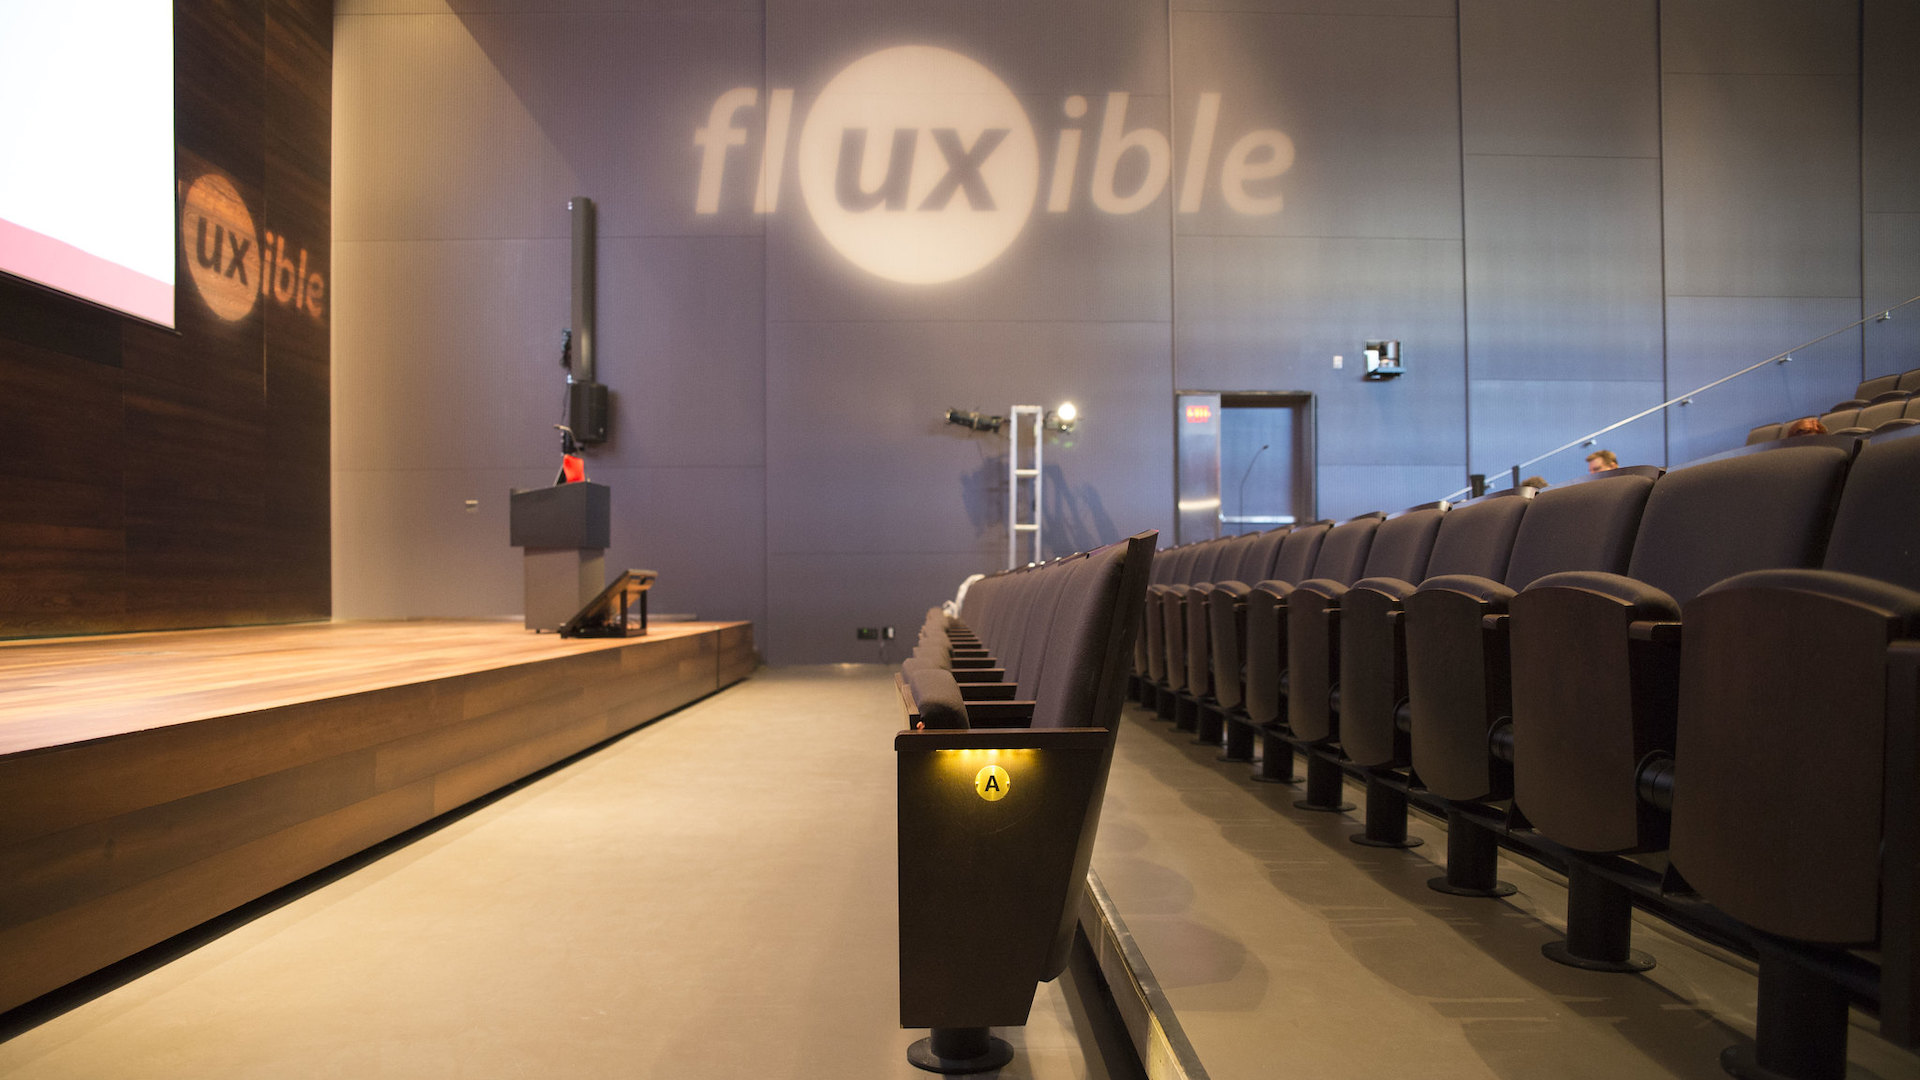 Empty rows of seats in a theatre with the Fluxible logo cast on a grey wall.